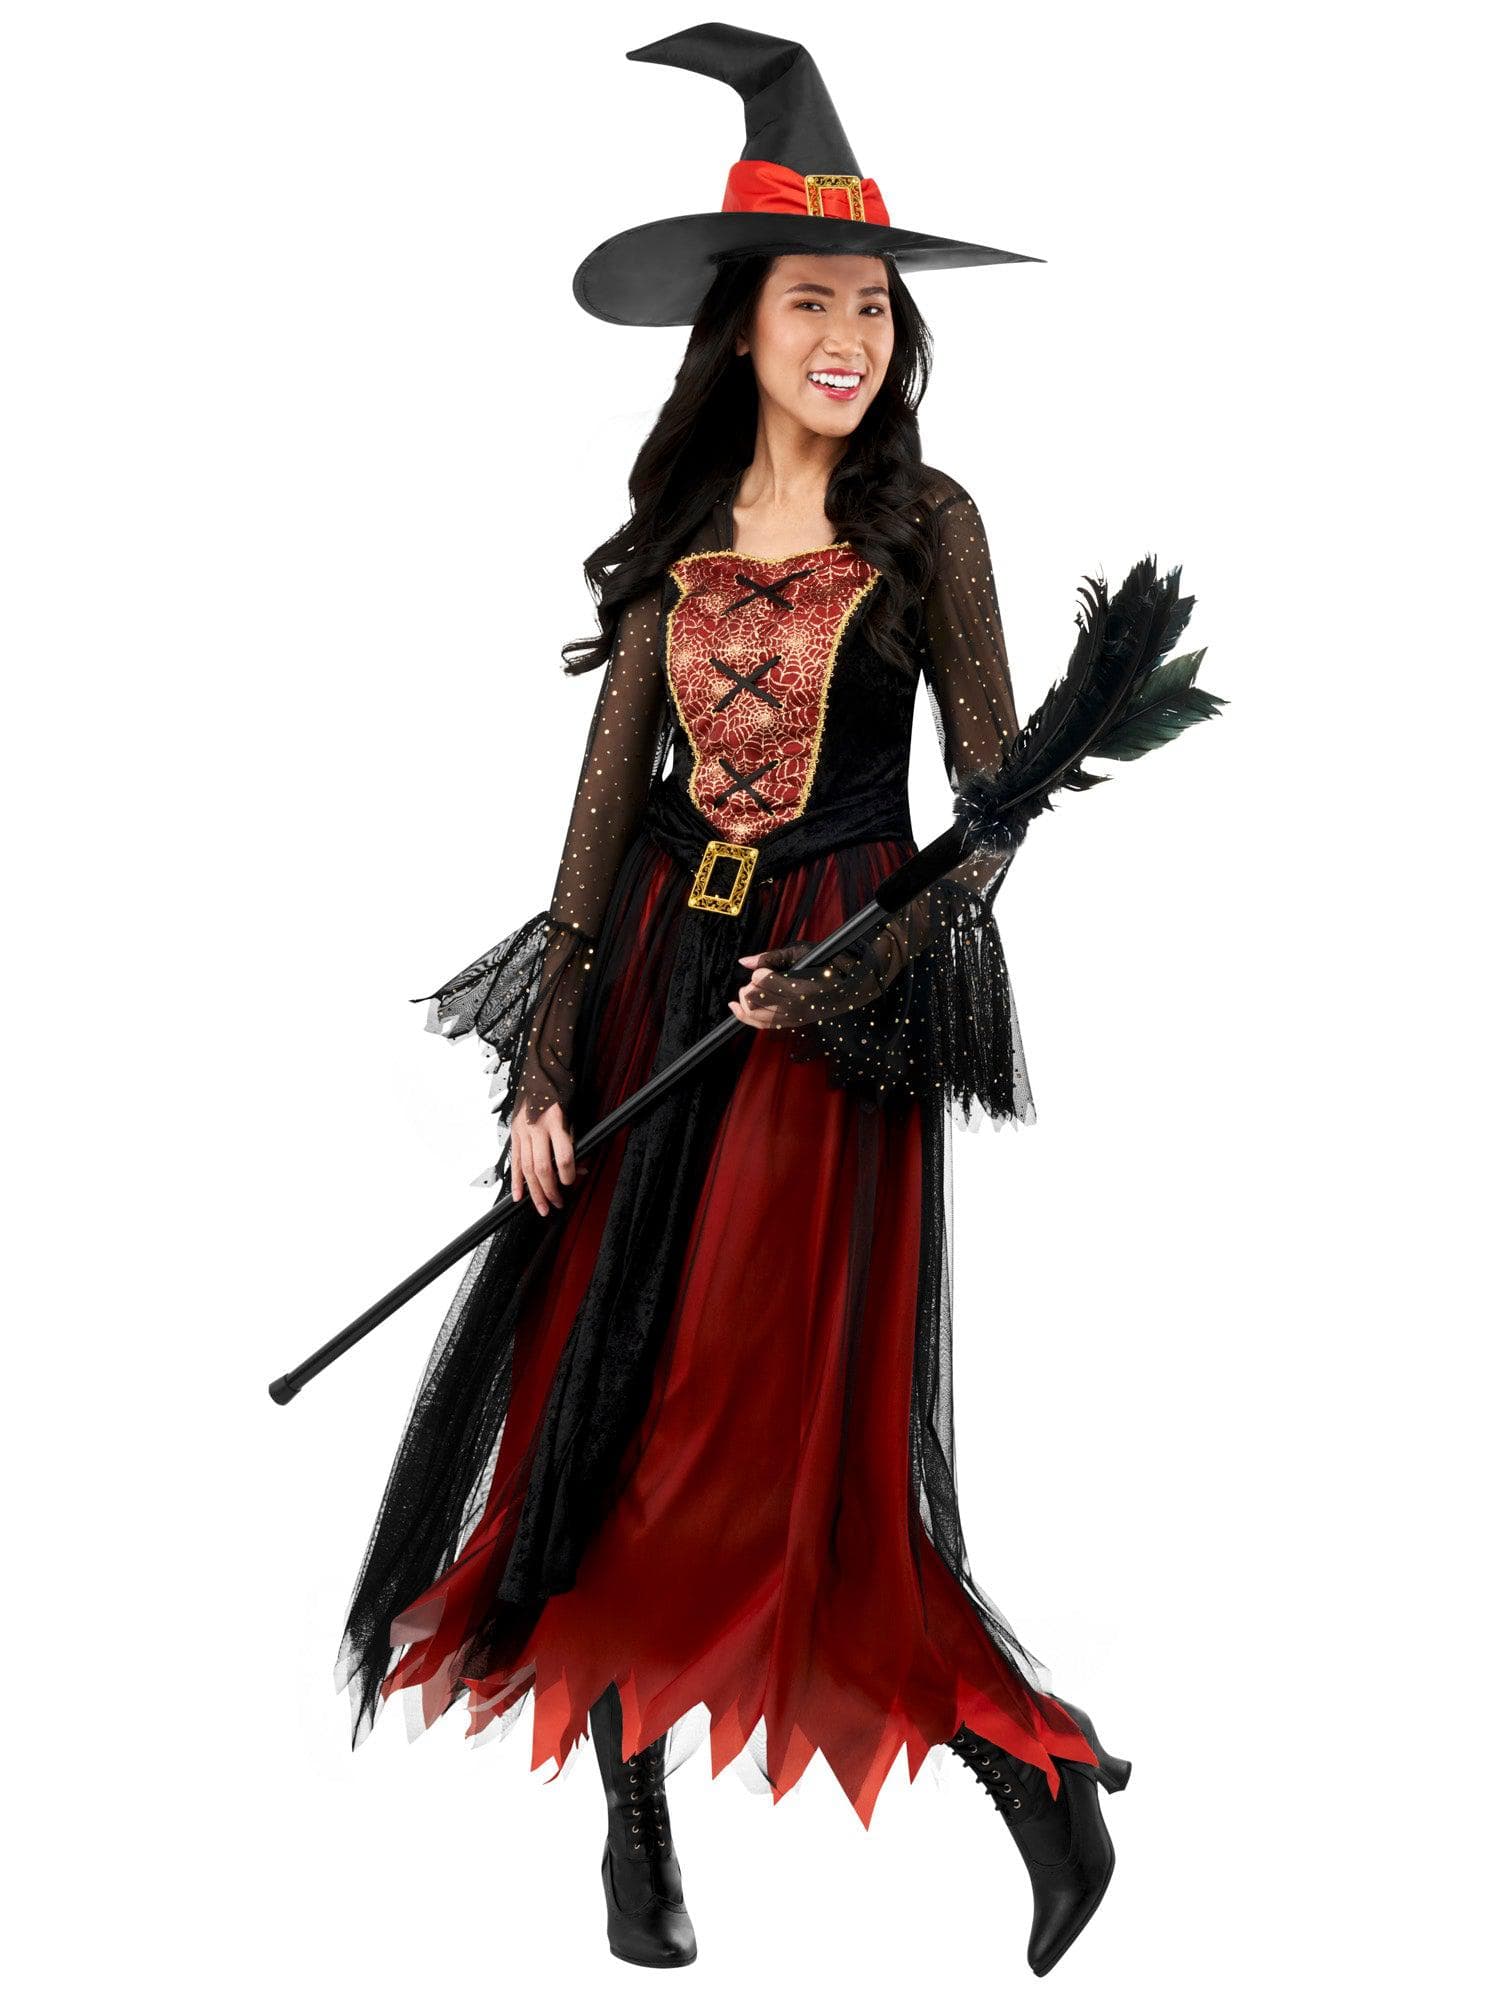 Women's Black and Orange Enchanted Witch Costume - costumes.com